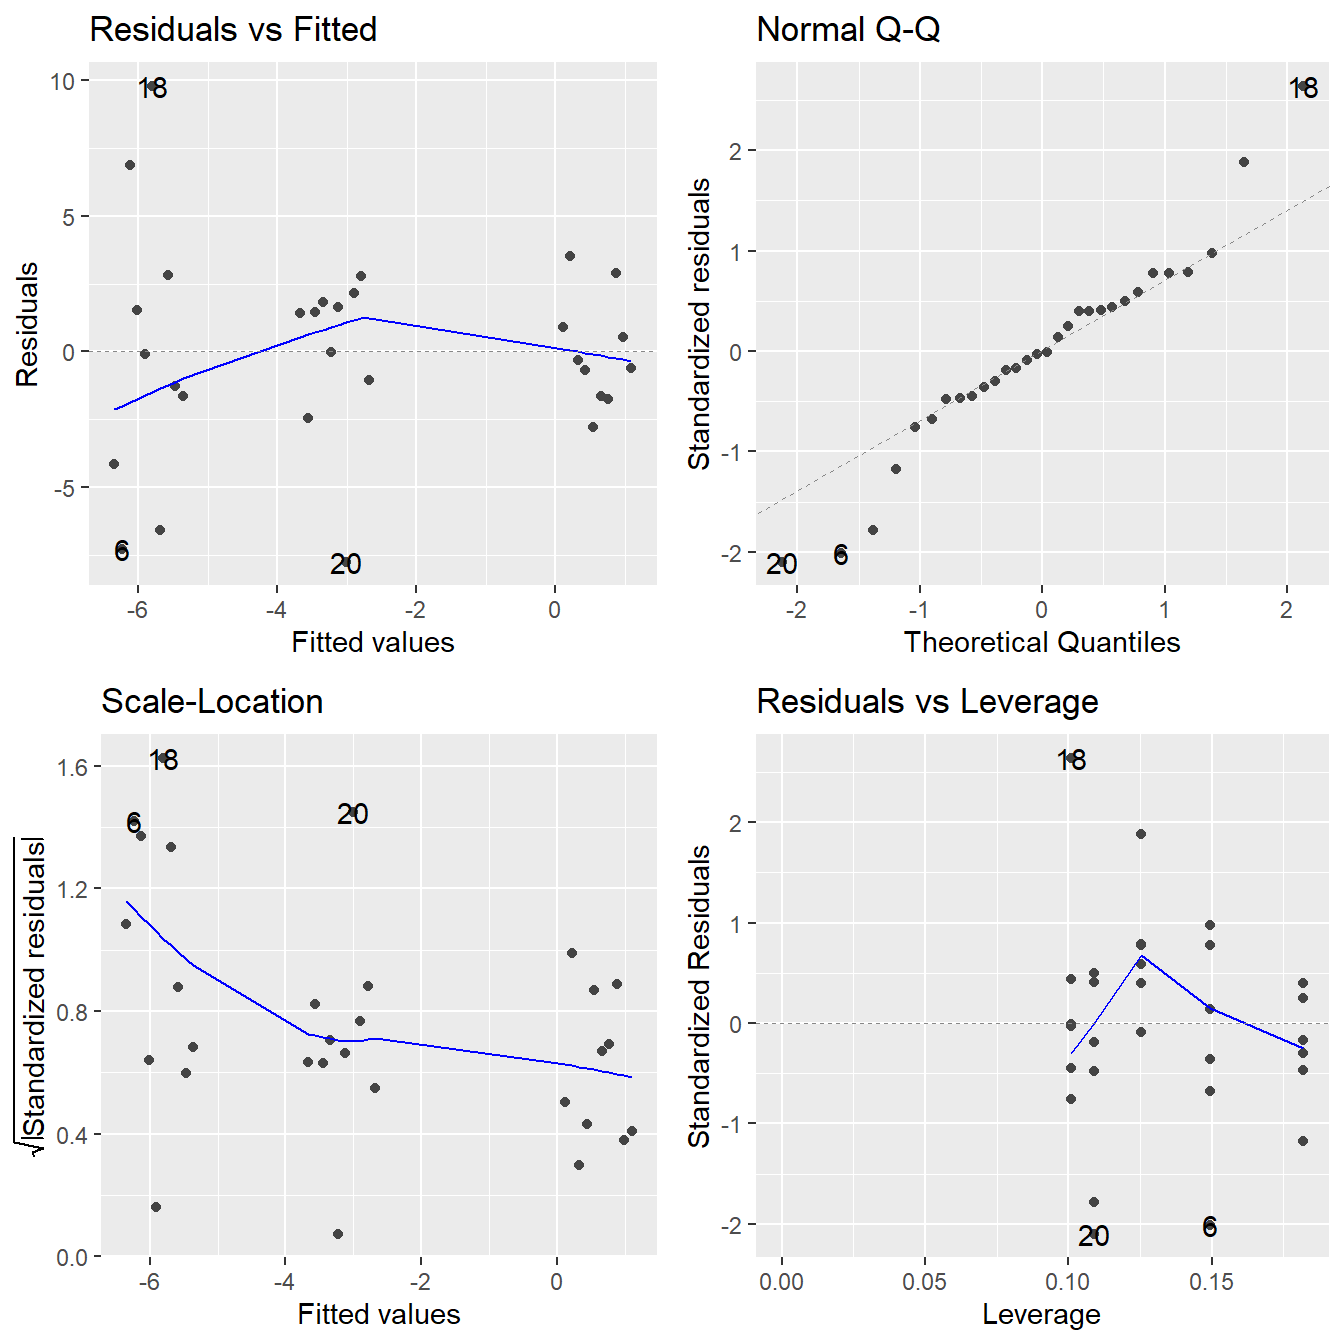 Residual diagnostic plots when the response variable is the weight change as a function of subject (block) and treatment. Here, the residuals appear to show some minor violations to the constant variance assumption as indicated by the Residuals vs Fitted and Scale-Location plots. Except for a single concerning observation, the normality assumption is satisfied based on the Normal Q-Q plot.